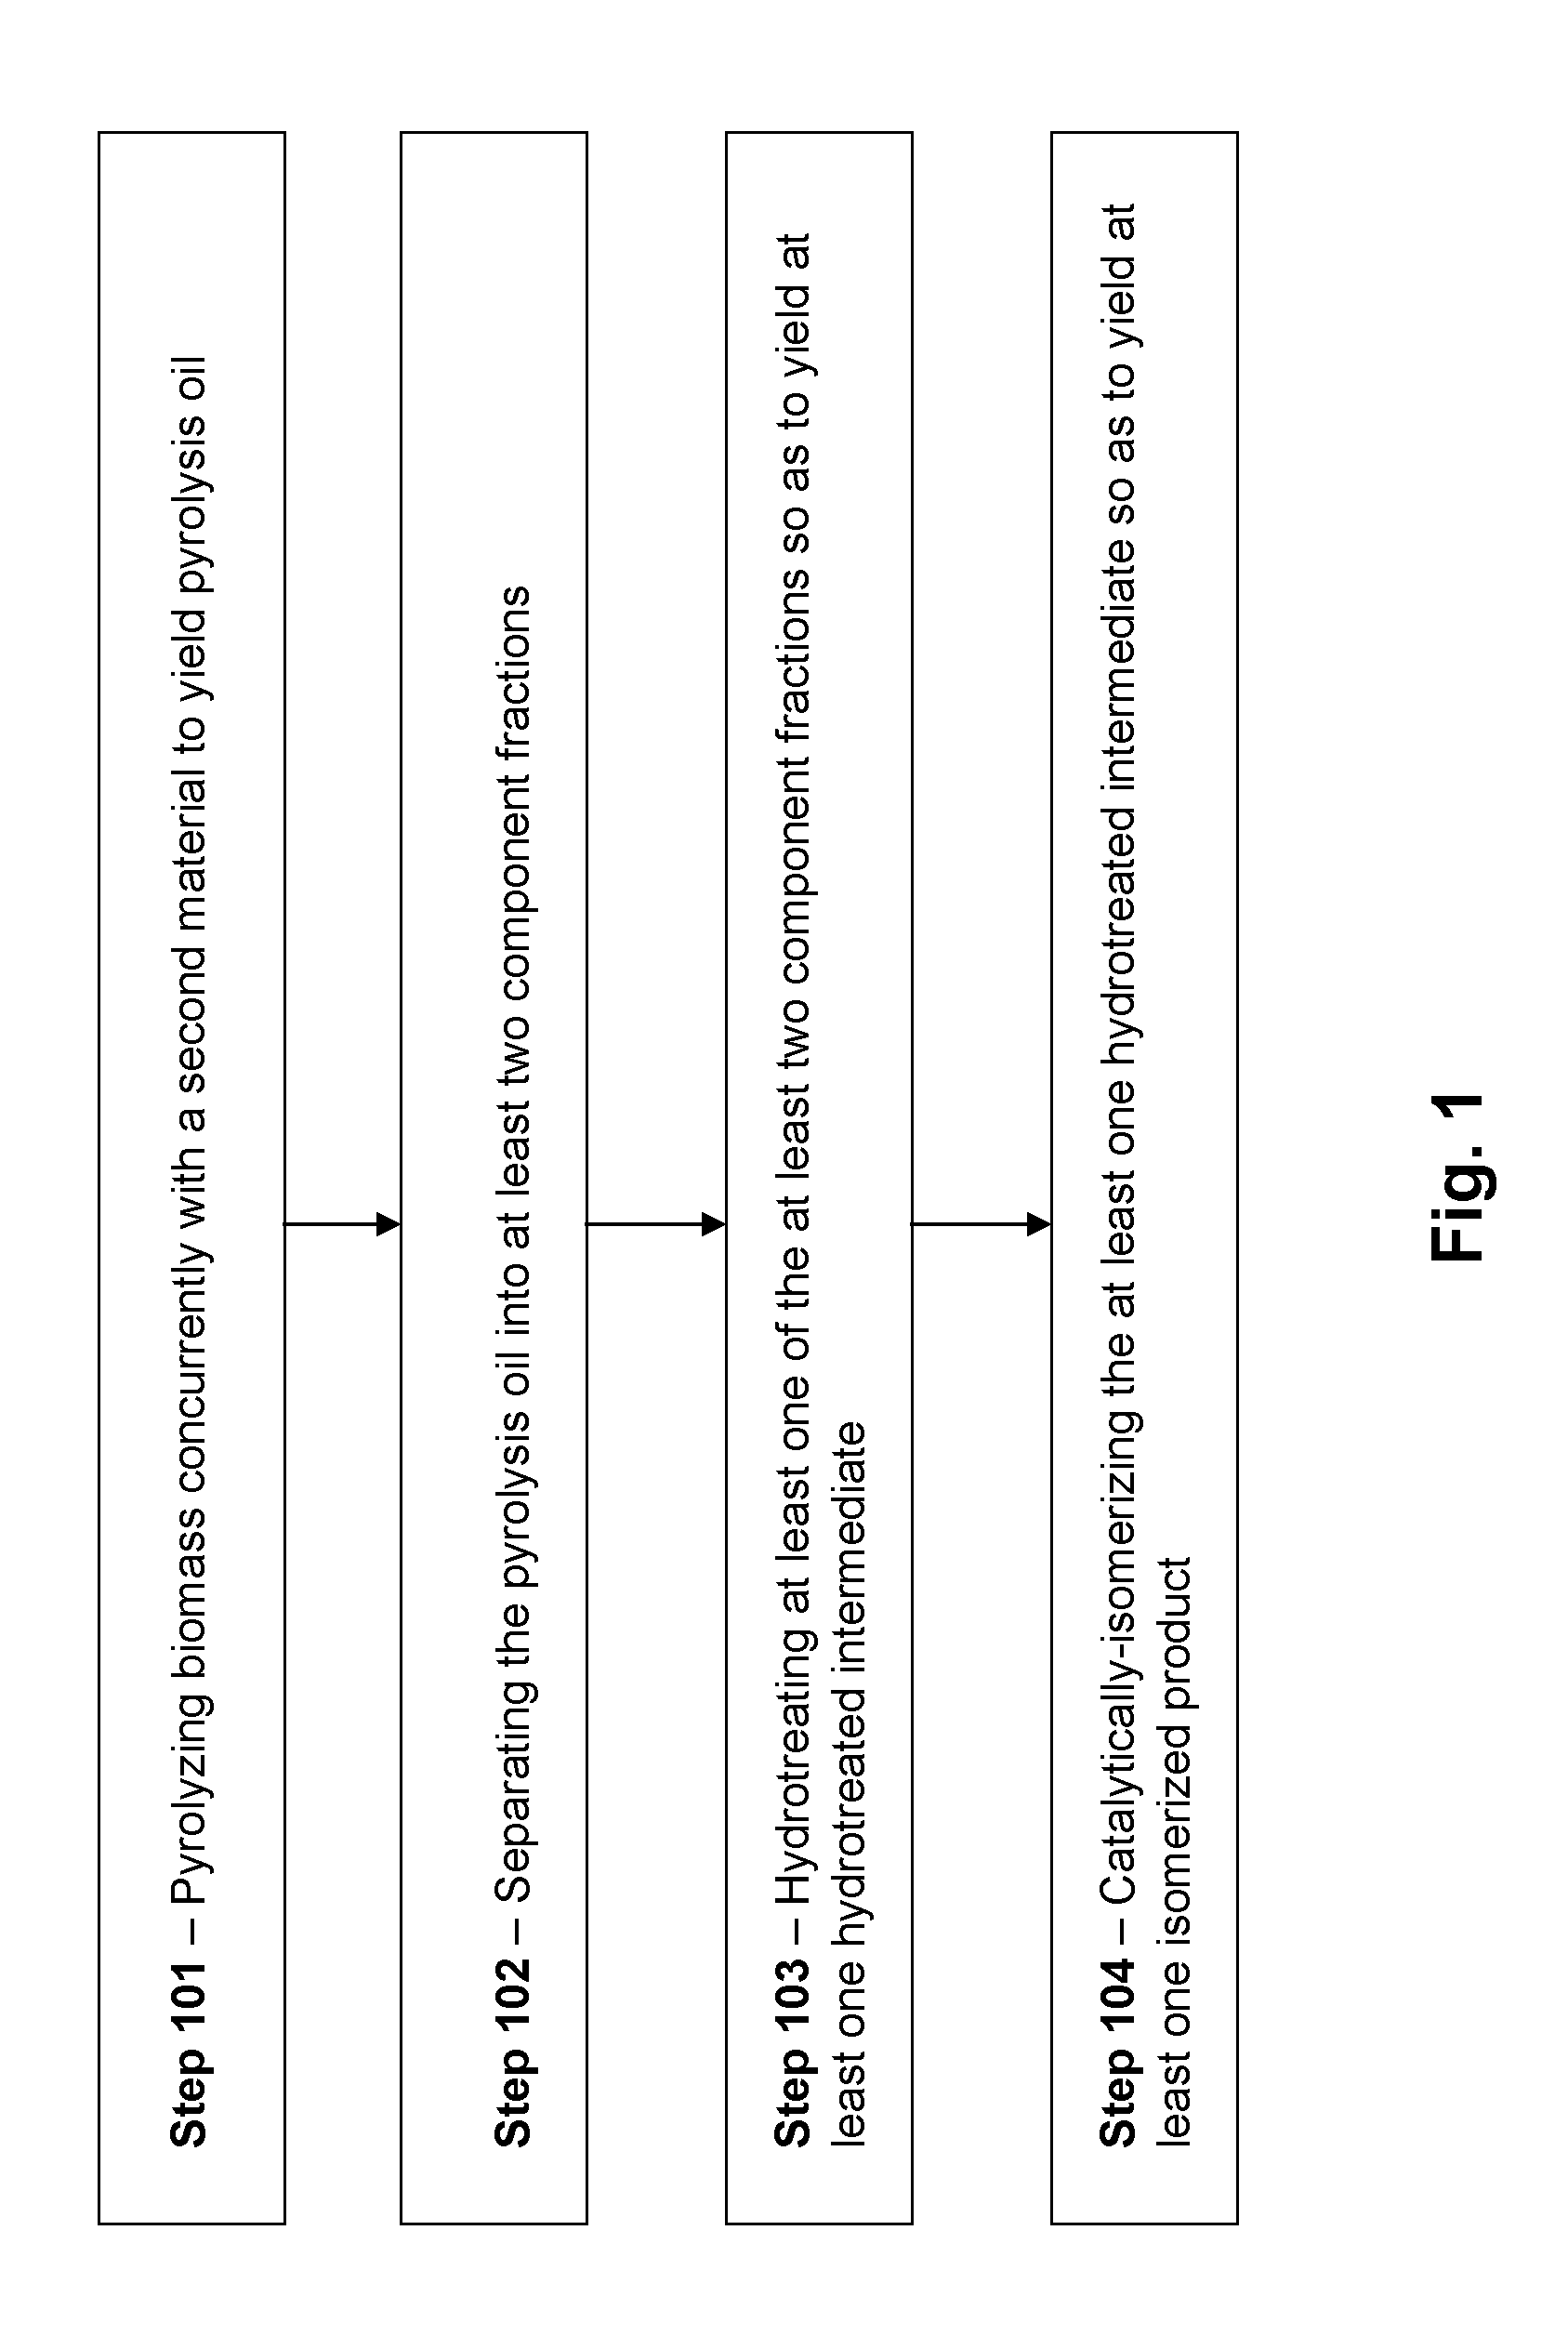 System and method for producing transportation fuels from waste plastic and biomass